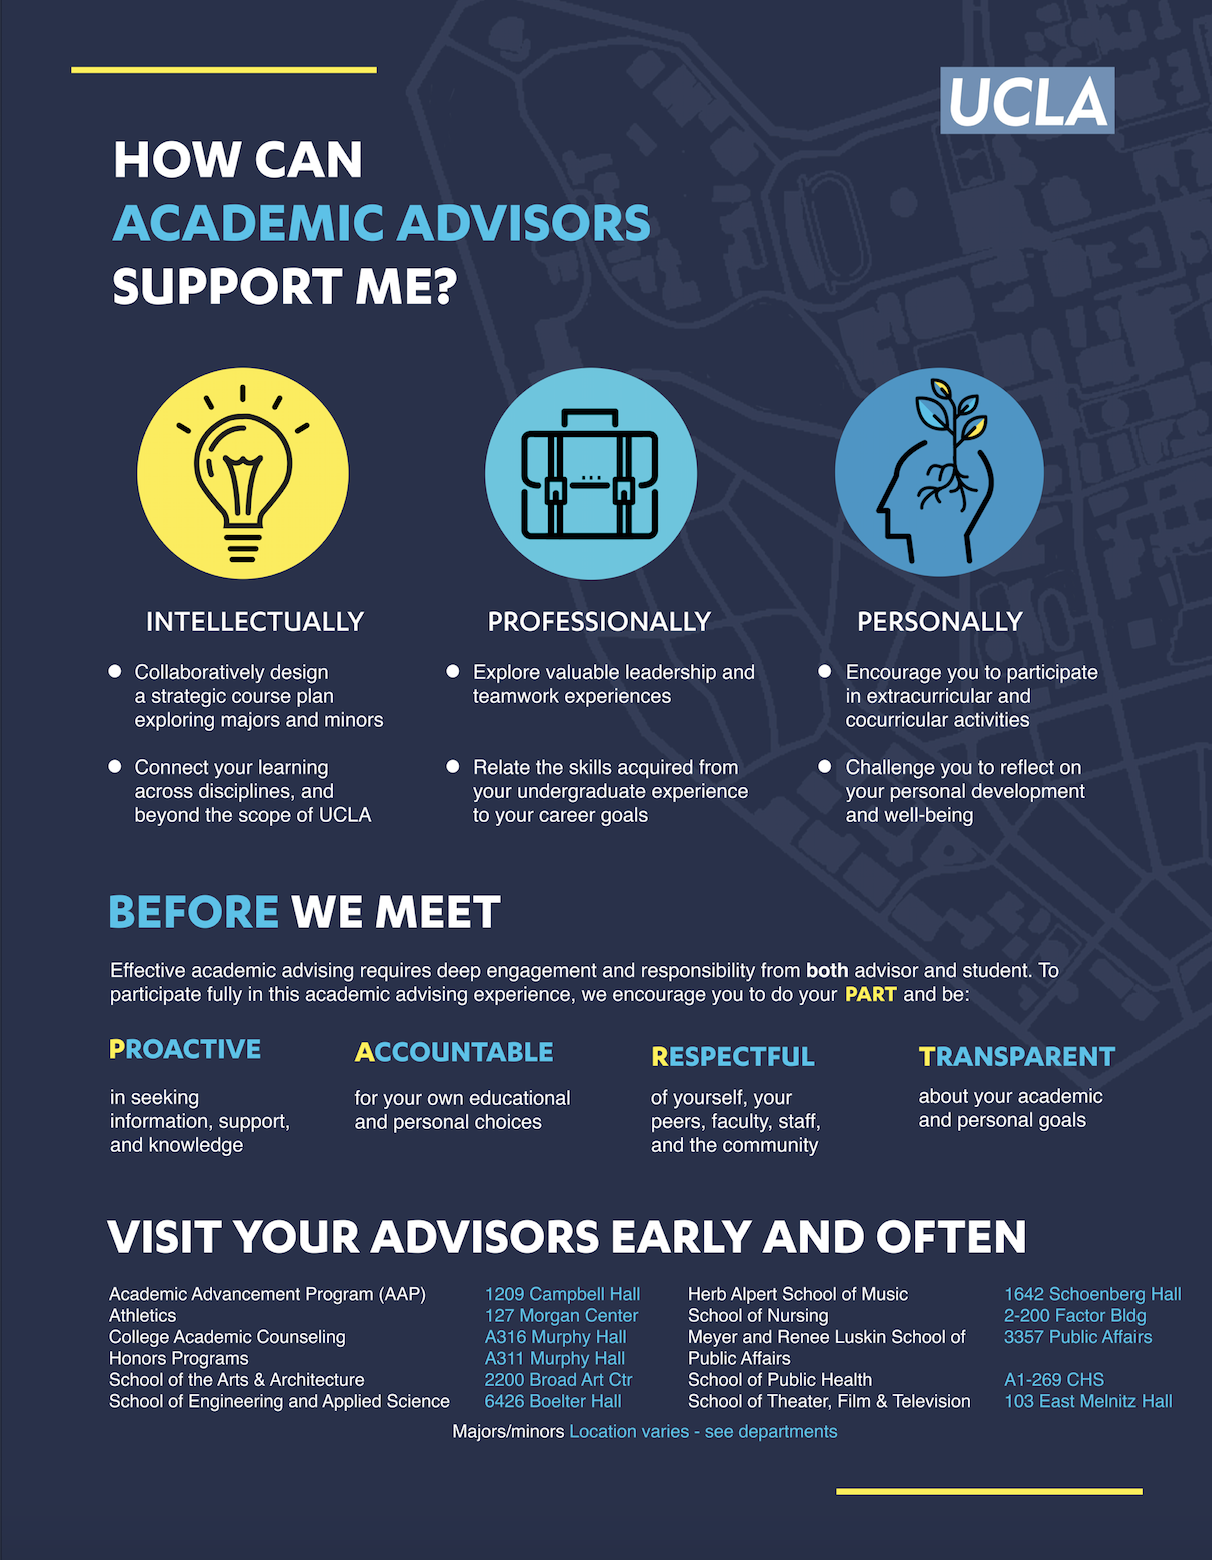 Infographic entitled "How can academic advisors support me?". Academic advisors can help students intellectually, professionally, and personally. Effective academic advising required deep engagement and responsibility from both advisor and student. Visit your advisors early and often, download the accessible PDF to find more information about your advising unit.